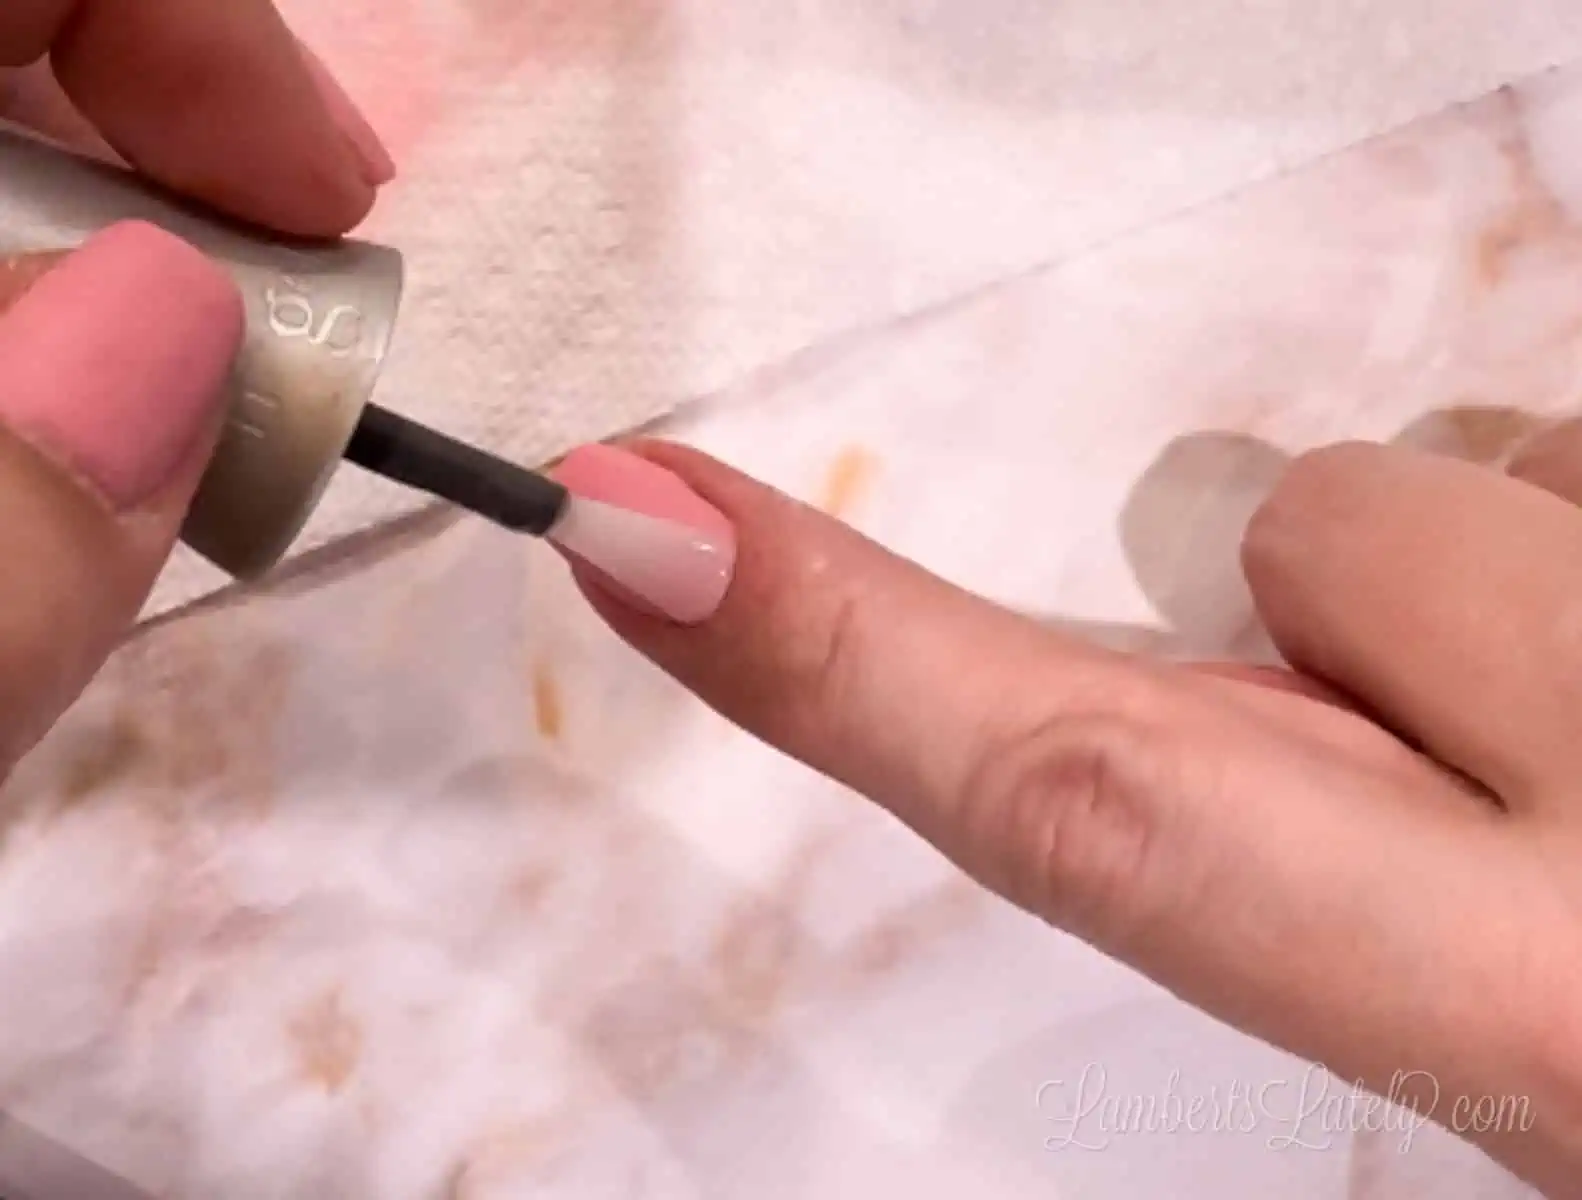 apply top coat to nails.